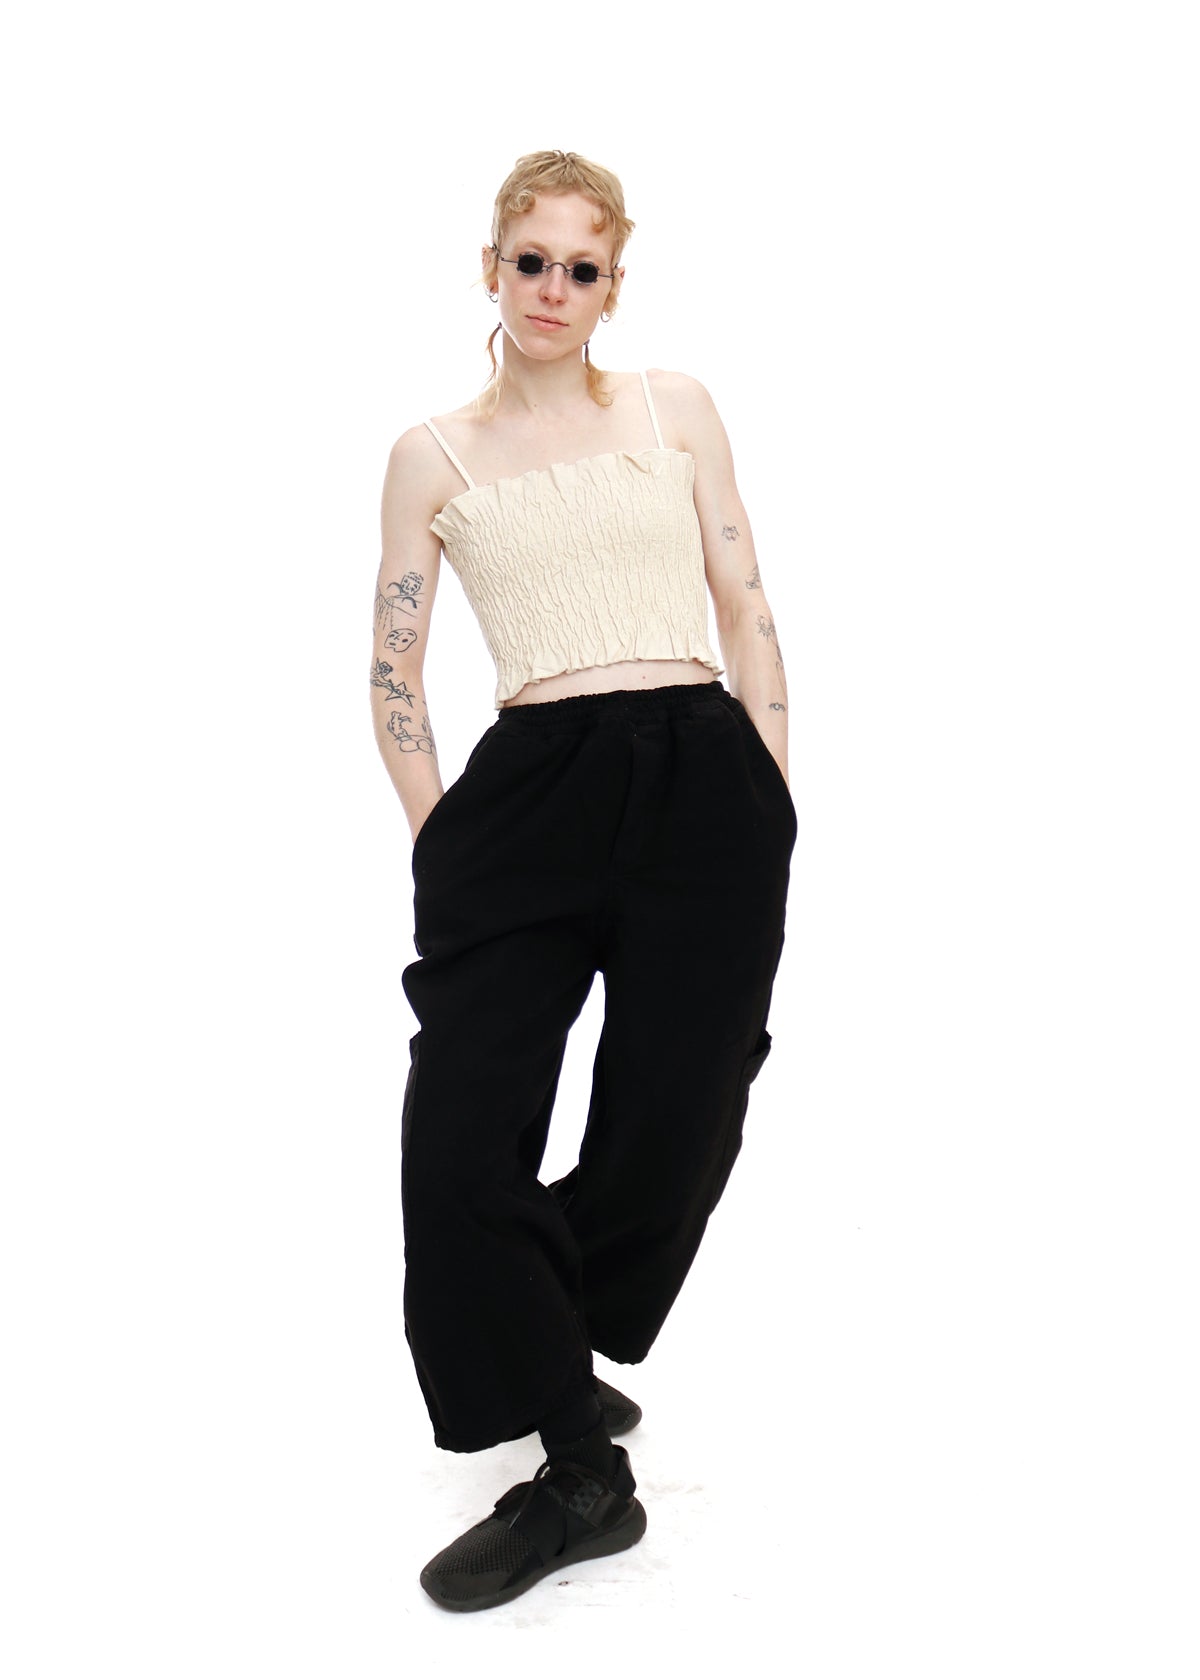 Licorice Chef Pant | MEALS Clothing